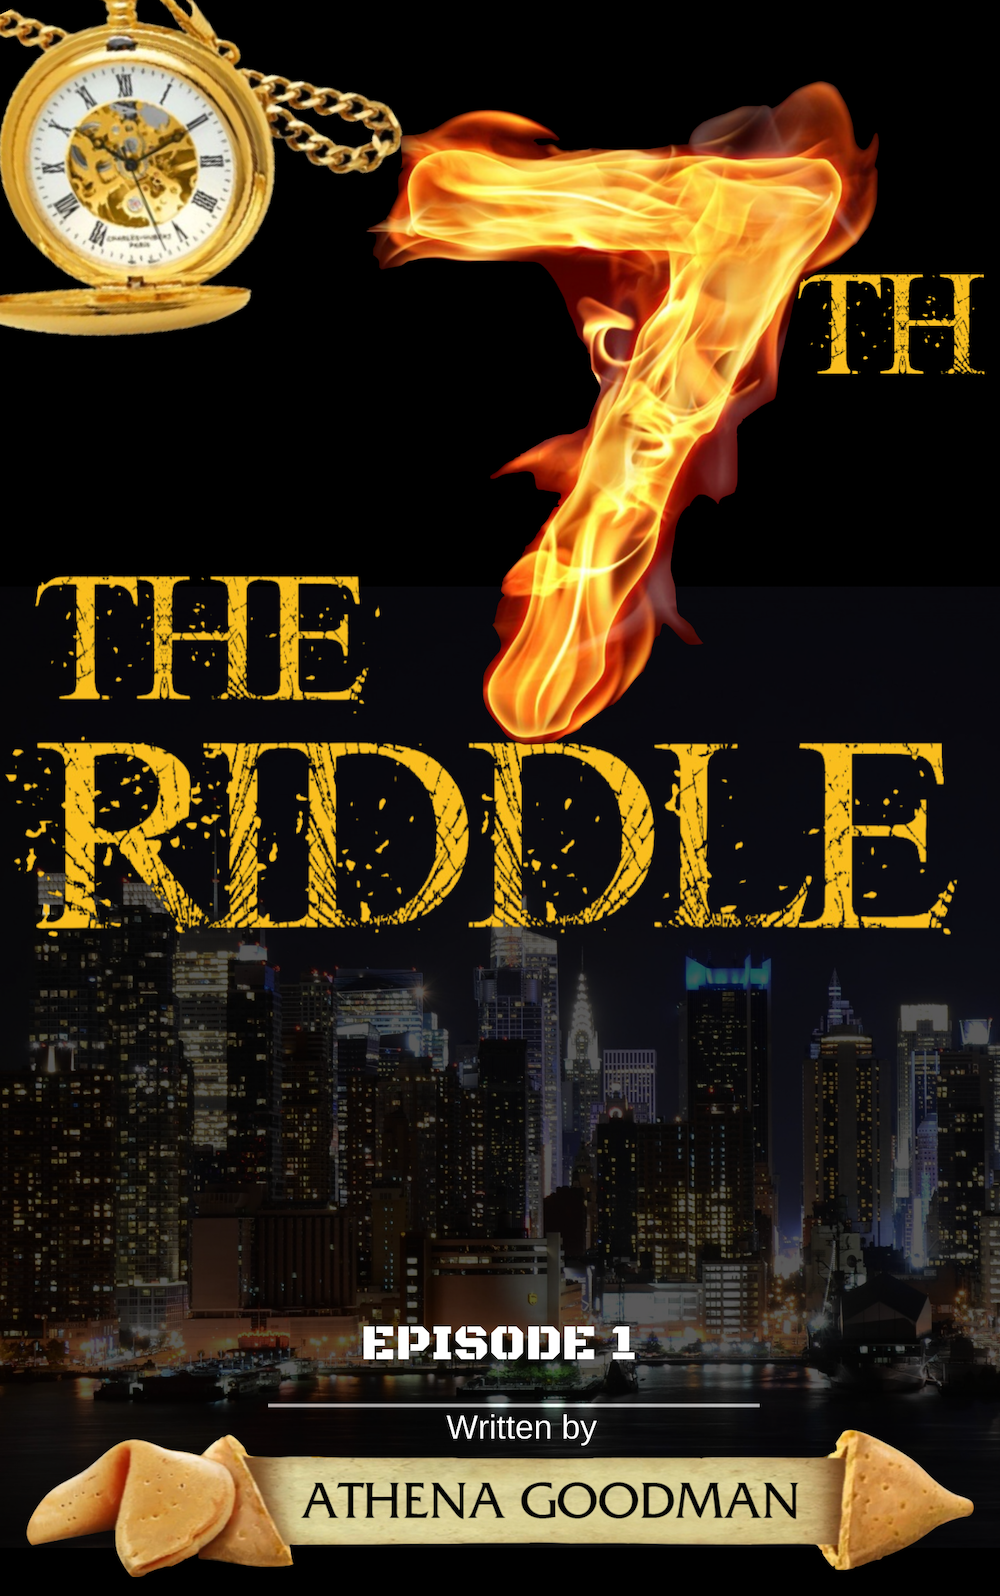 The 7th Riddle